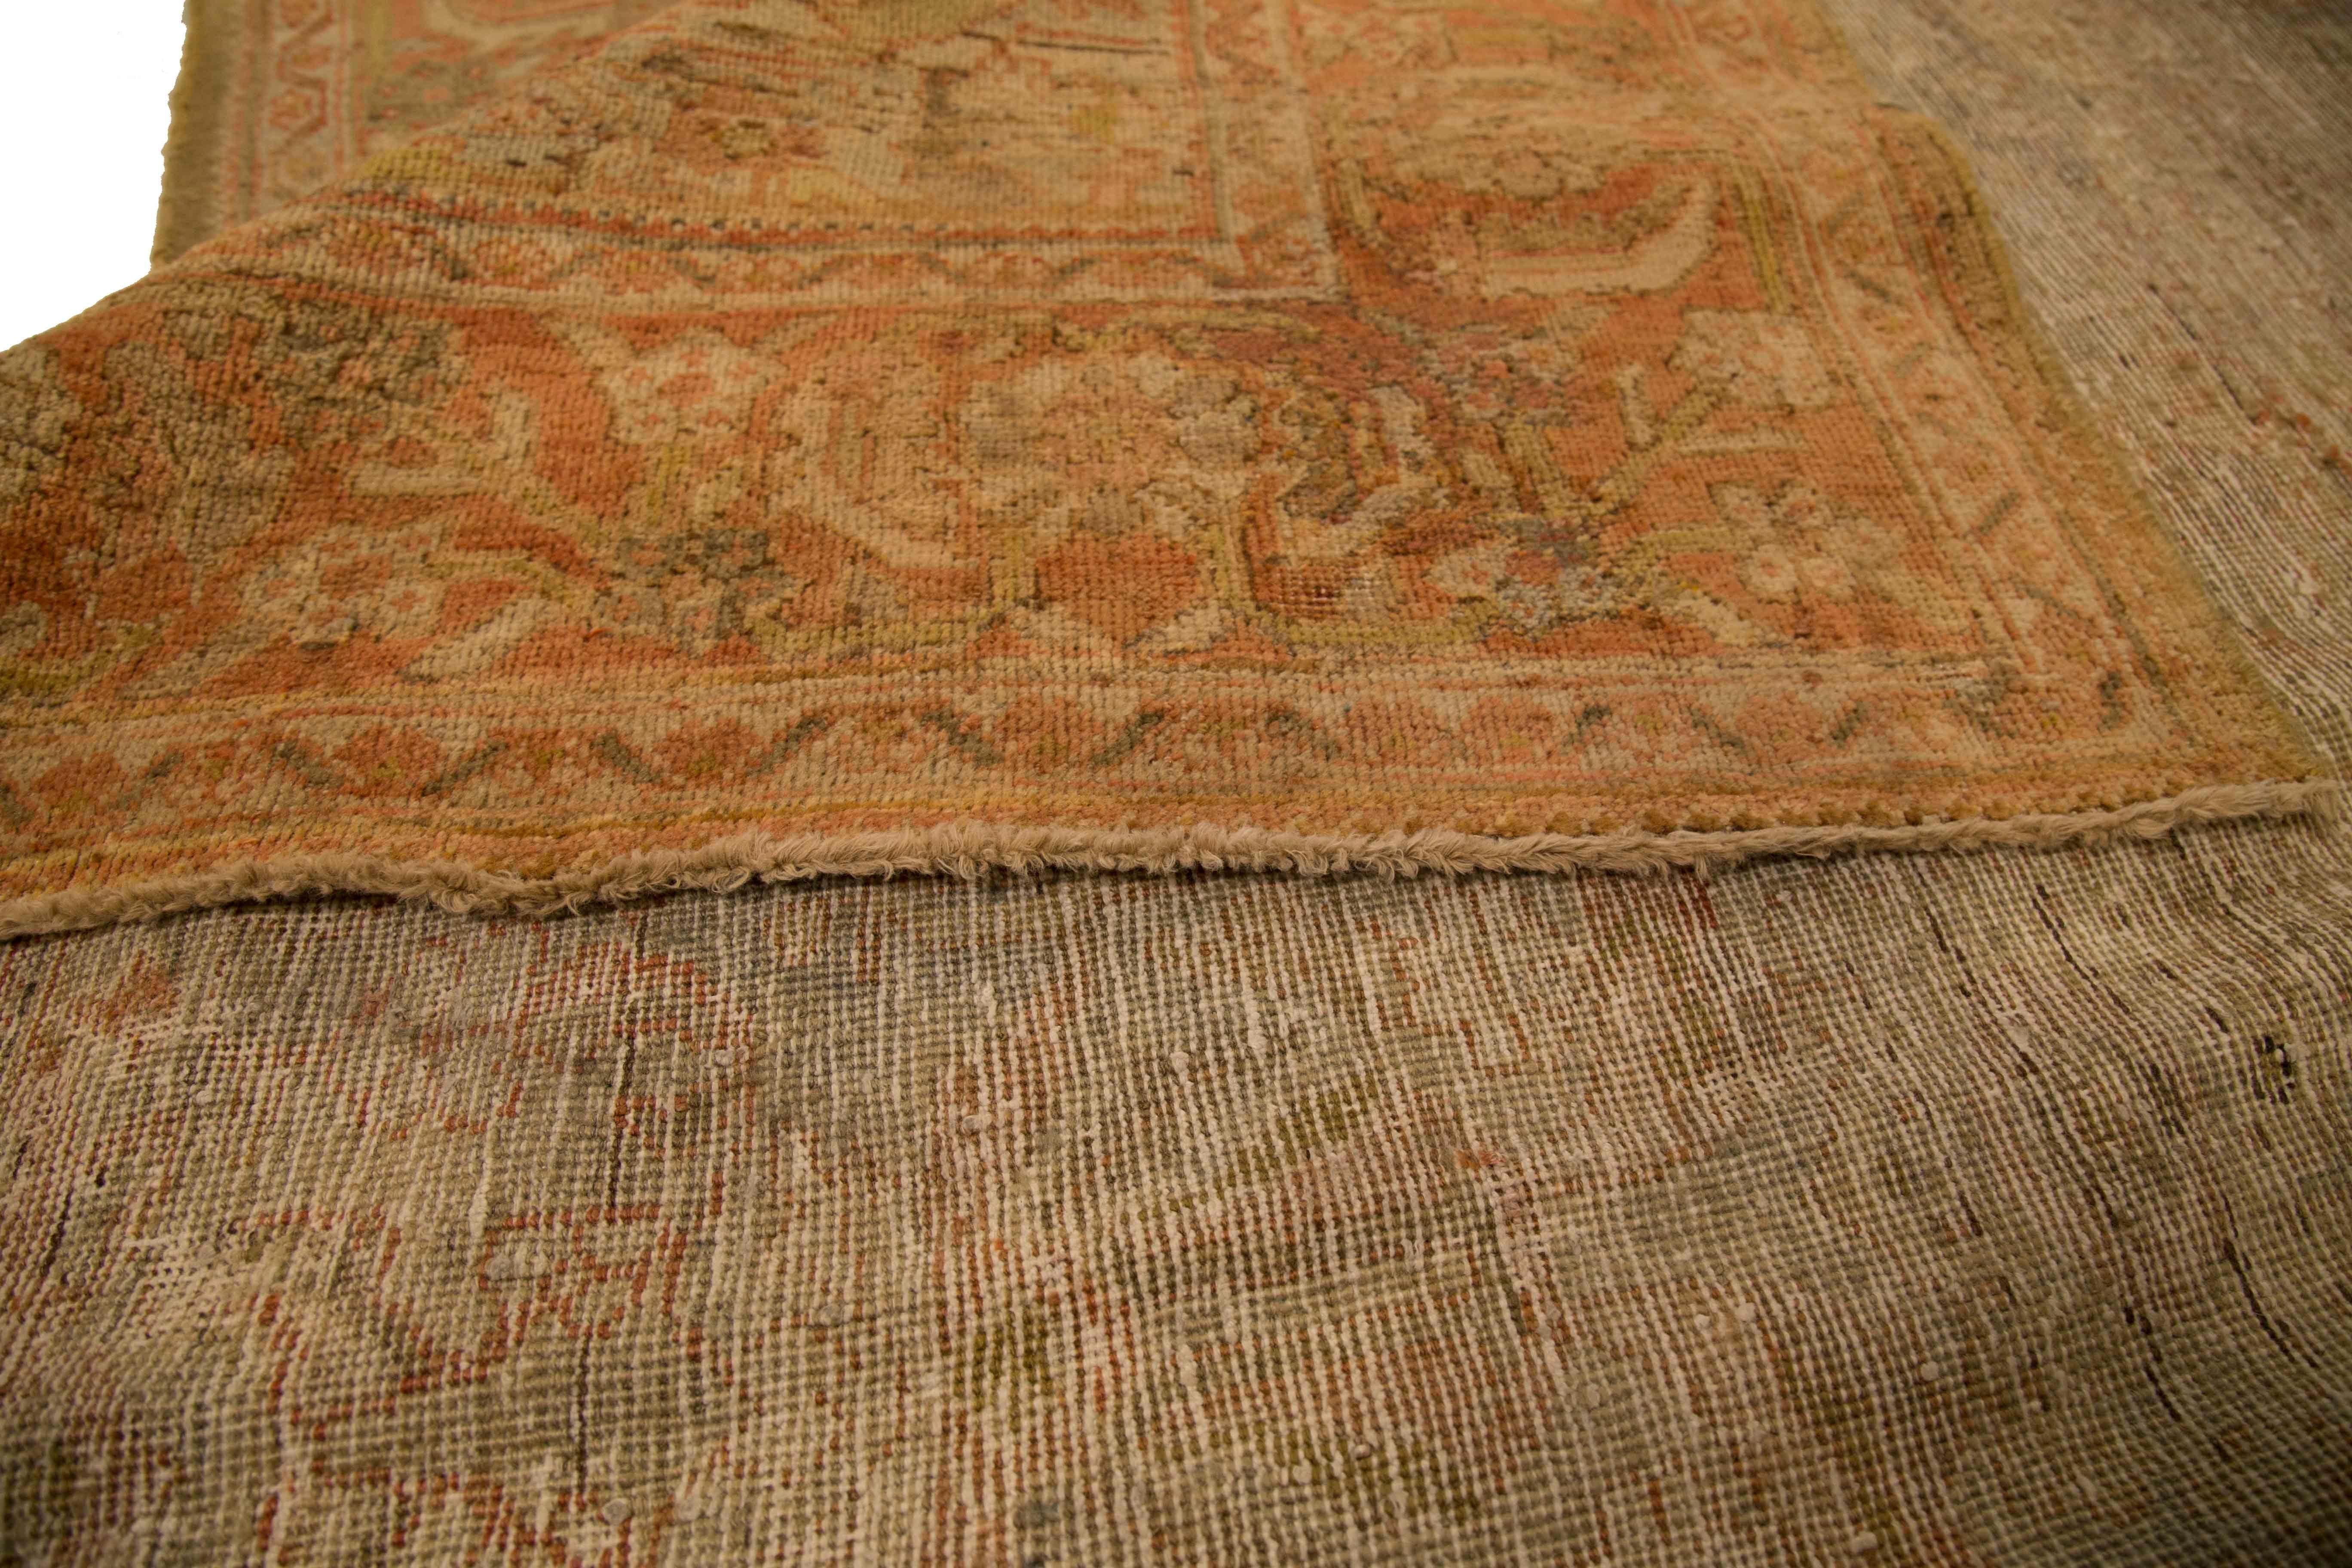 Antique Persian rug made of fine wool and organic dyes. It’s handwoven using design patterns popularized by weavers in Malayer, one of the biggest rug making centers in ancient Persia. It features an intricate weave of floral details using warm,